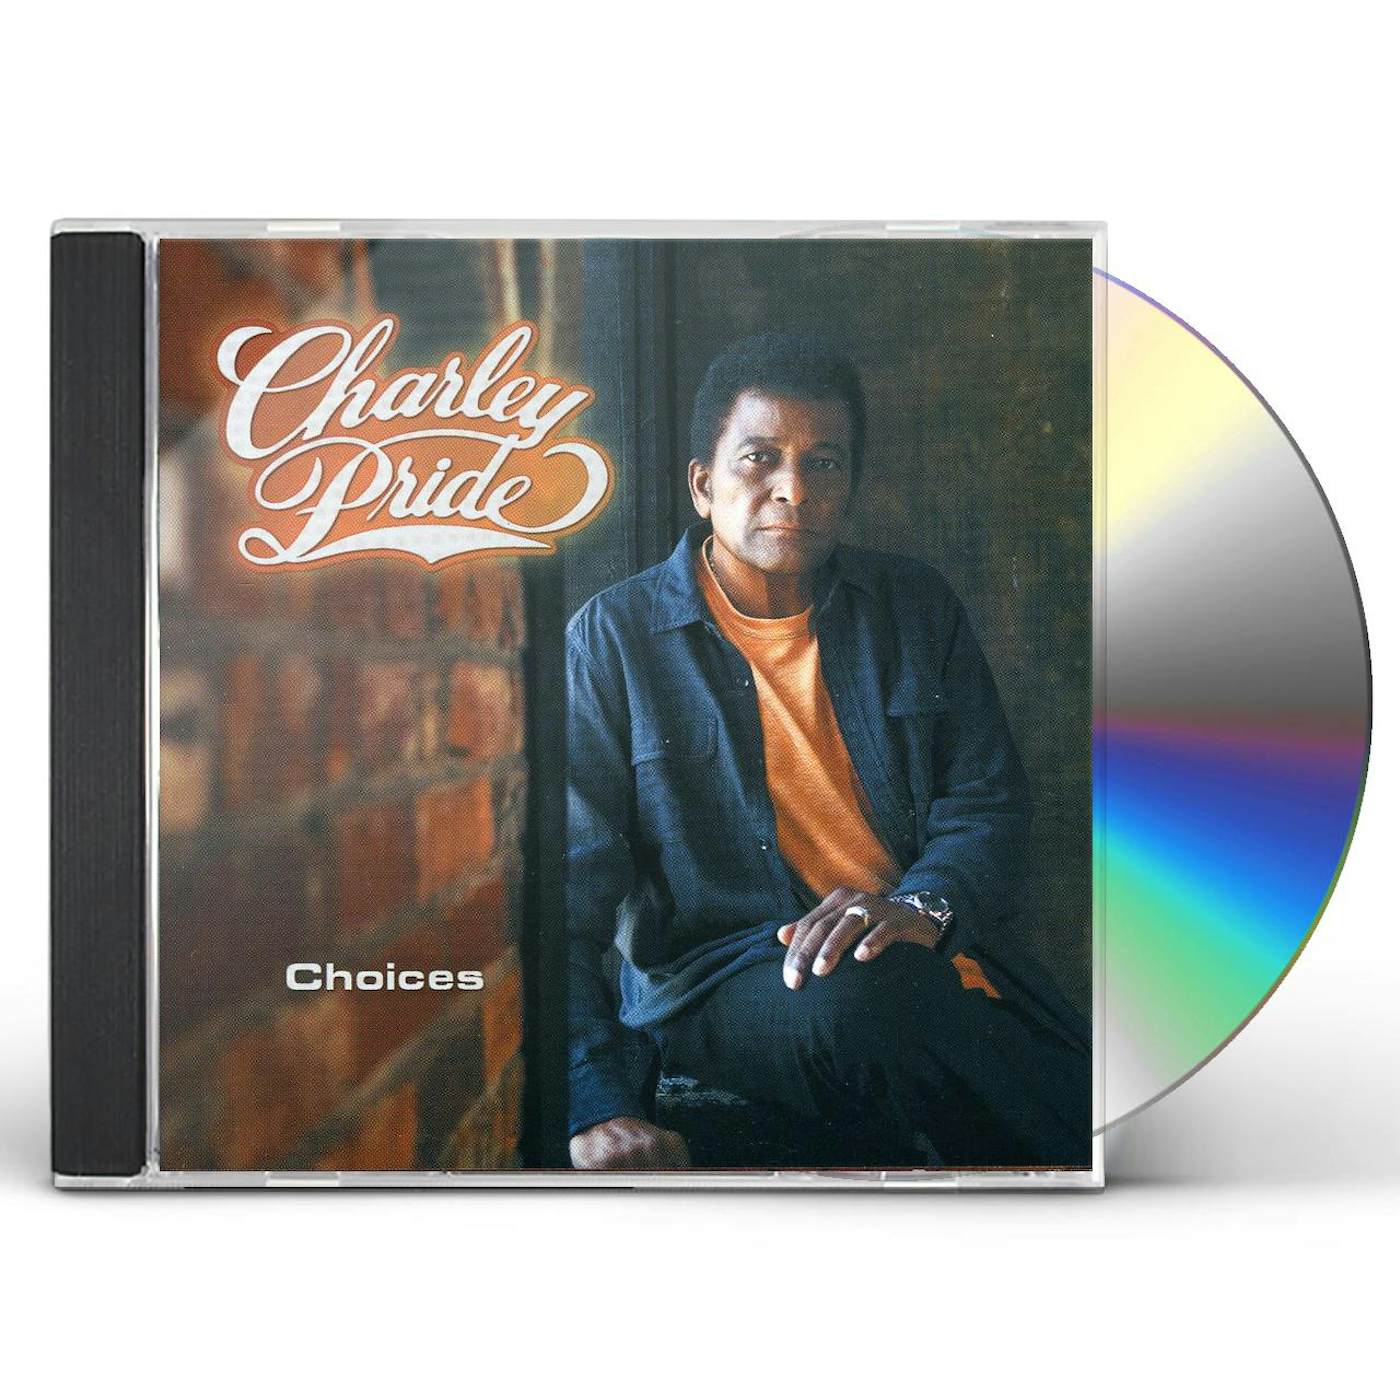 Charley Pride CHOICES CD